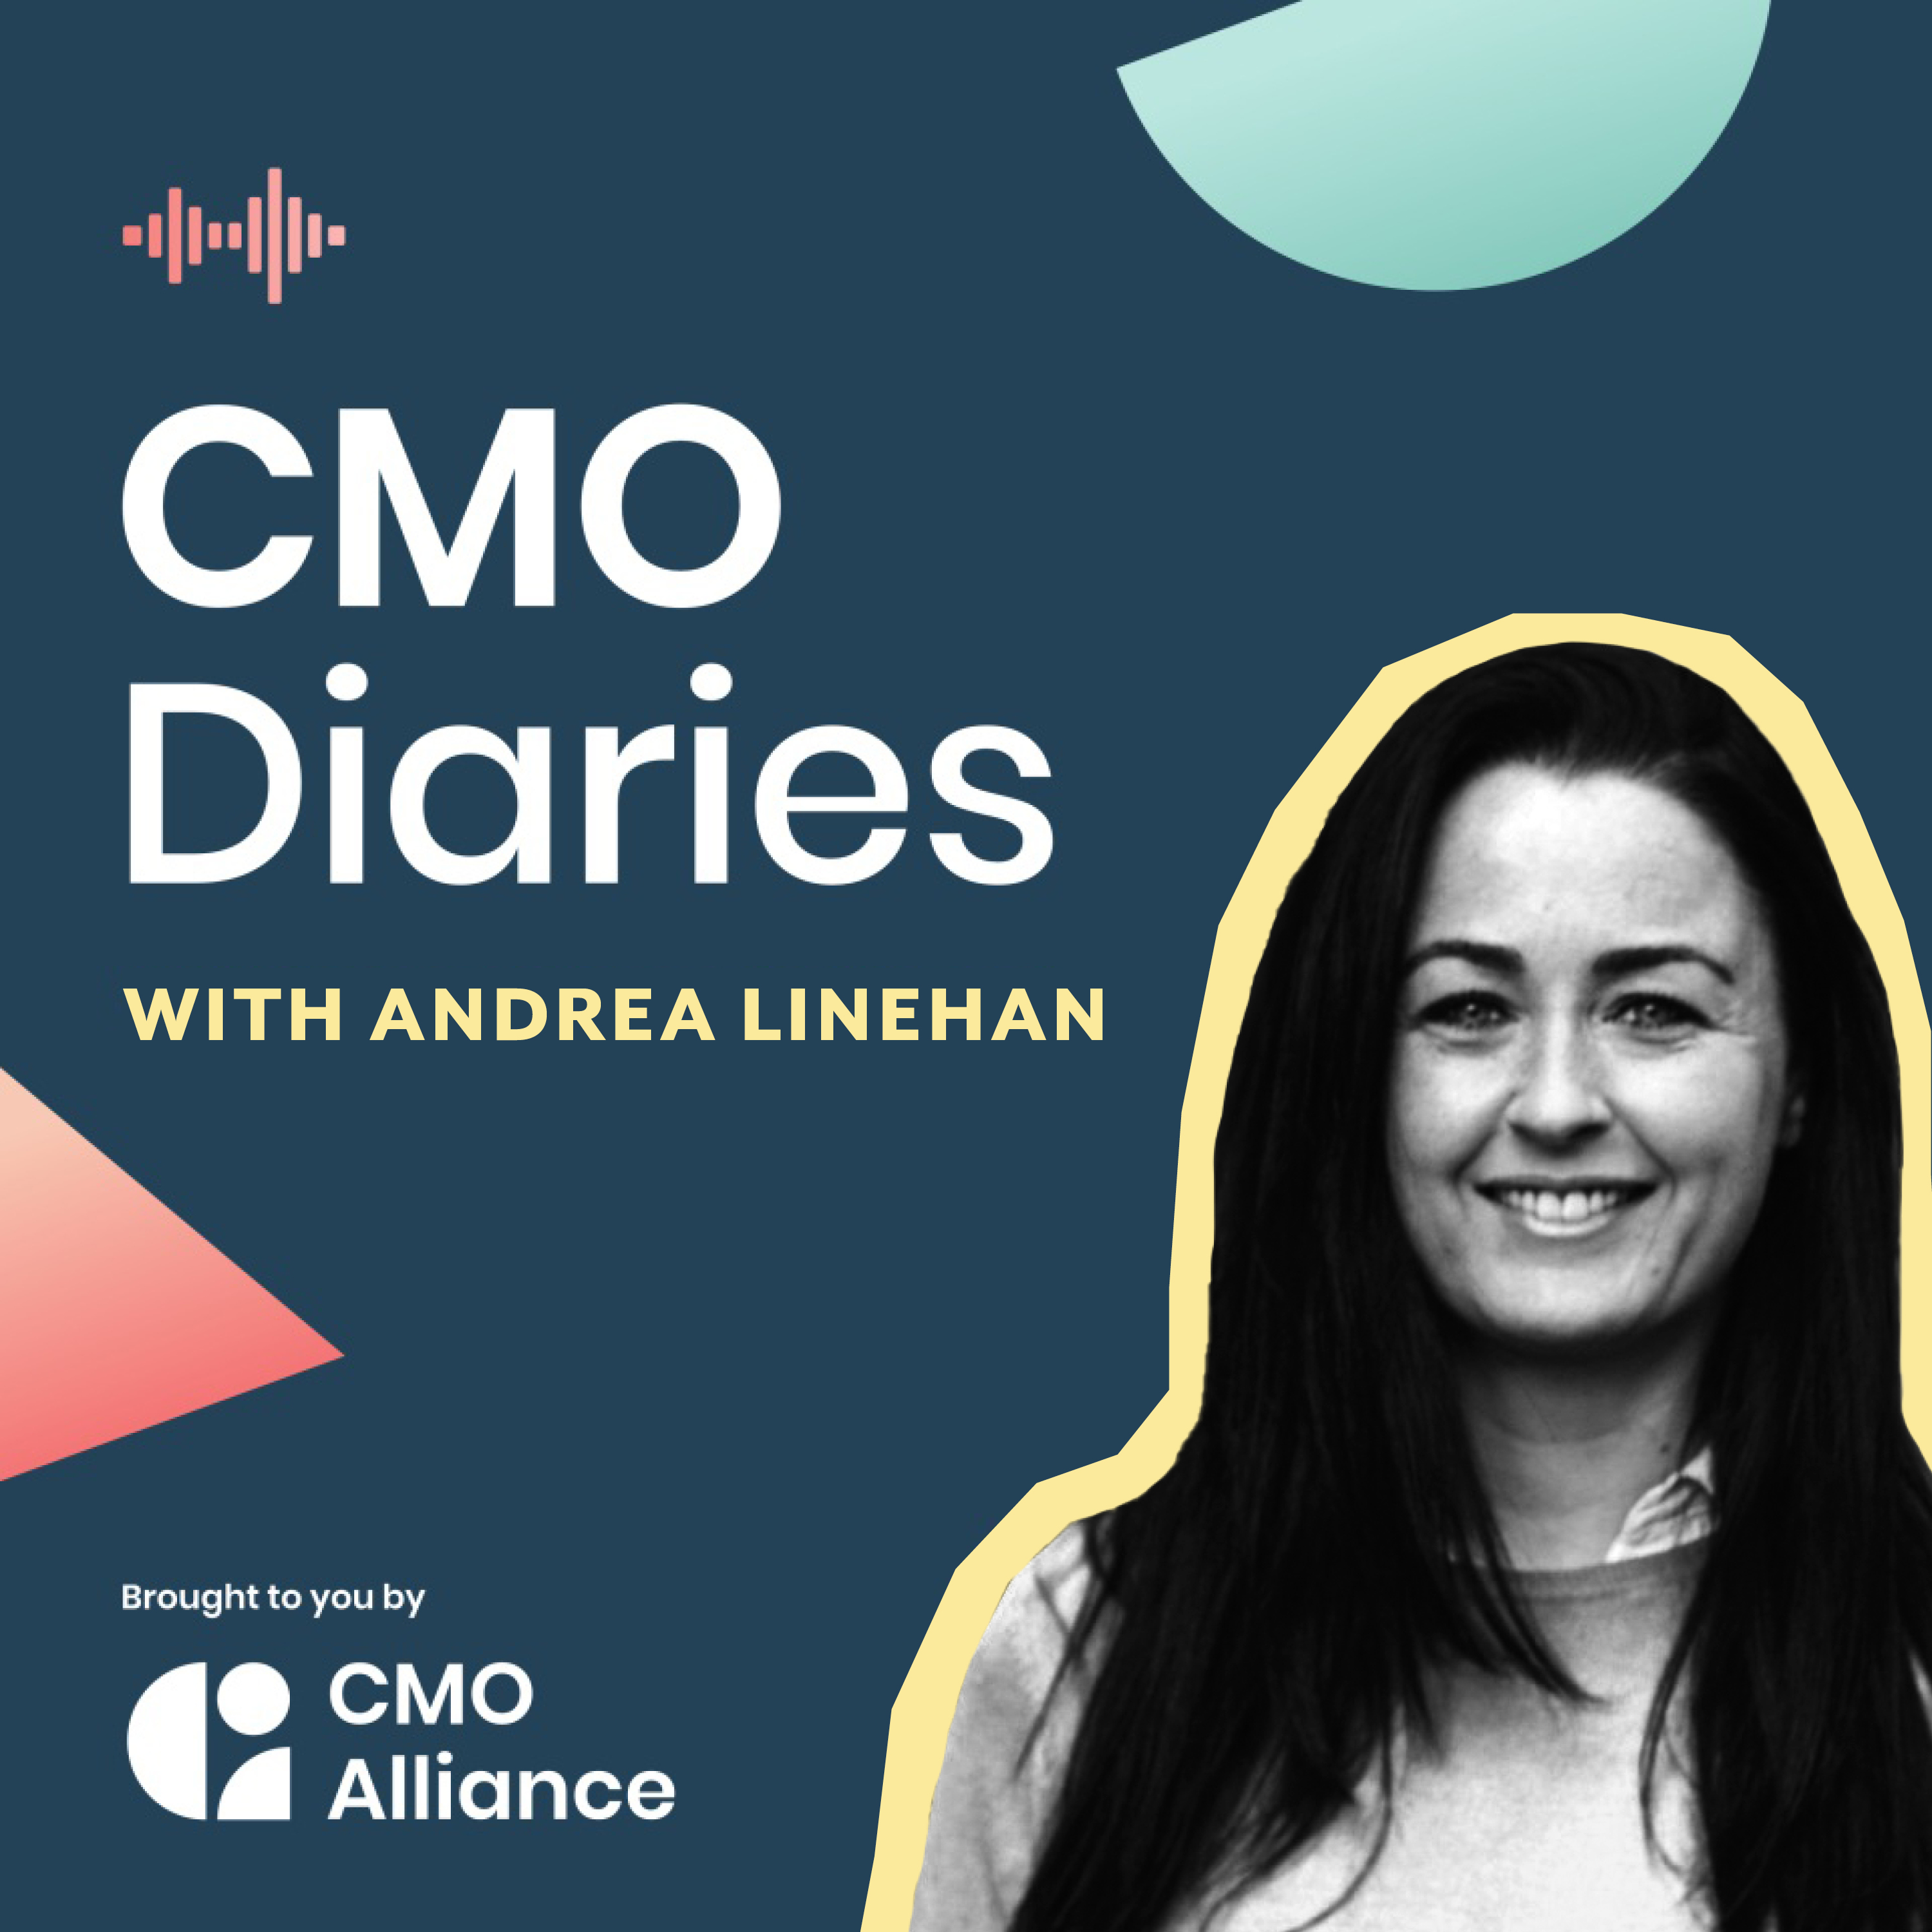 Employee branding takes a meeting of minds | Andrea Linehan | CMO Diaries